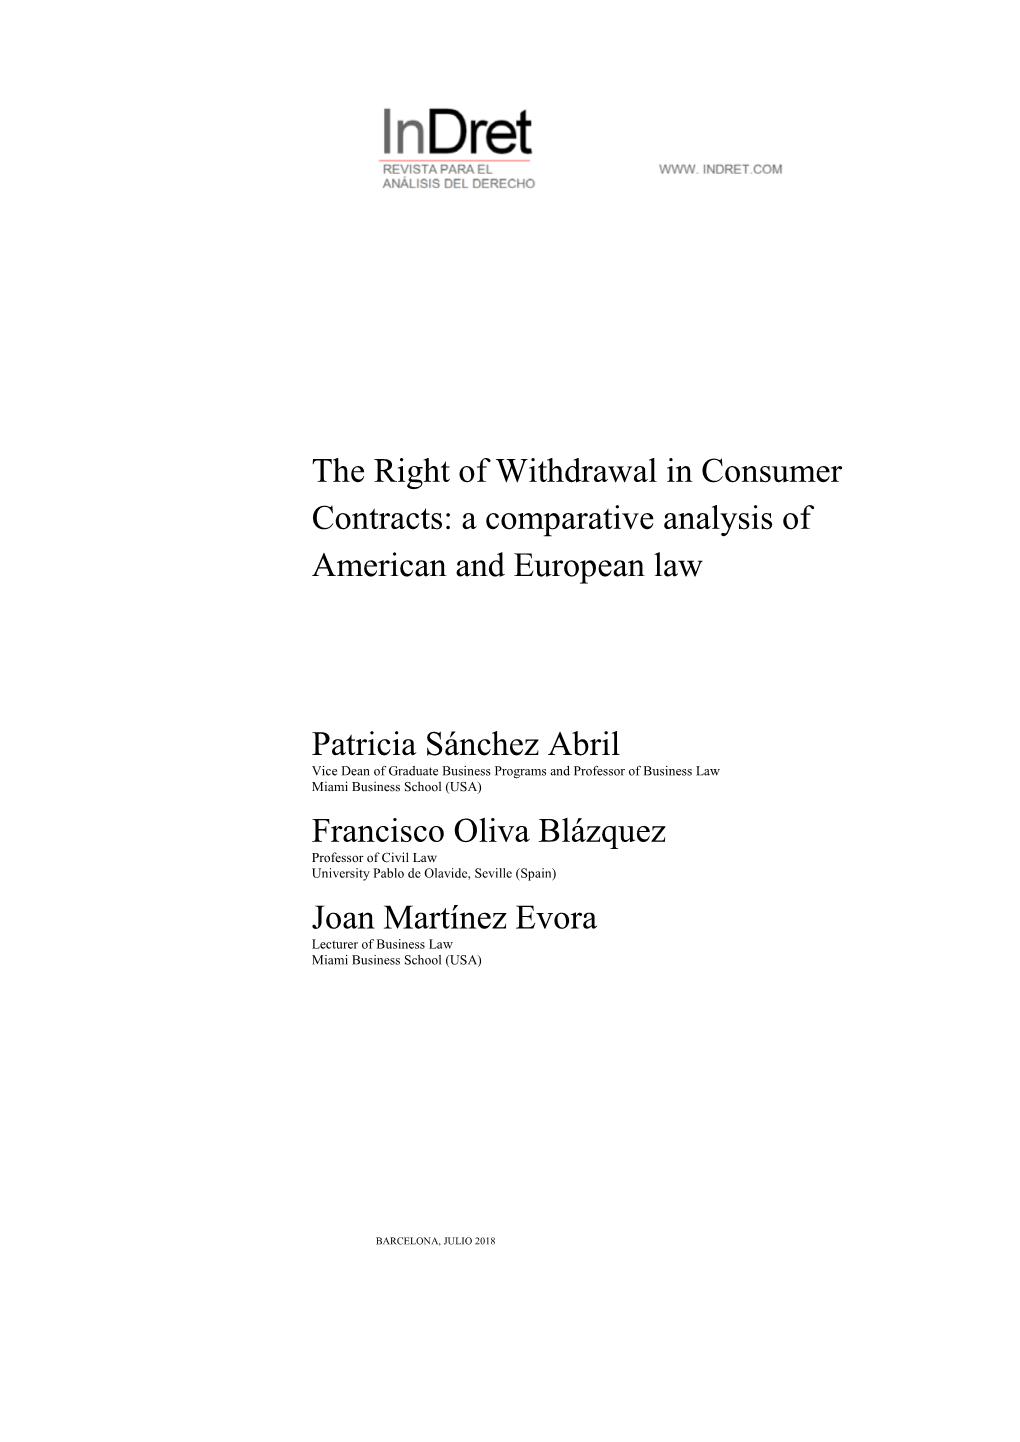 The Right of Withdrawal in Consumer Contracts: a Comparative Analysis of American and European Law